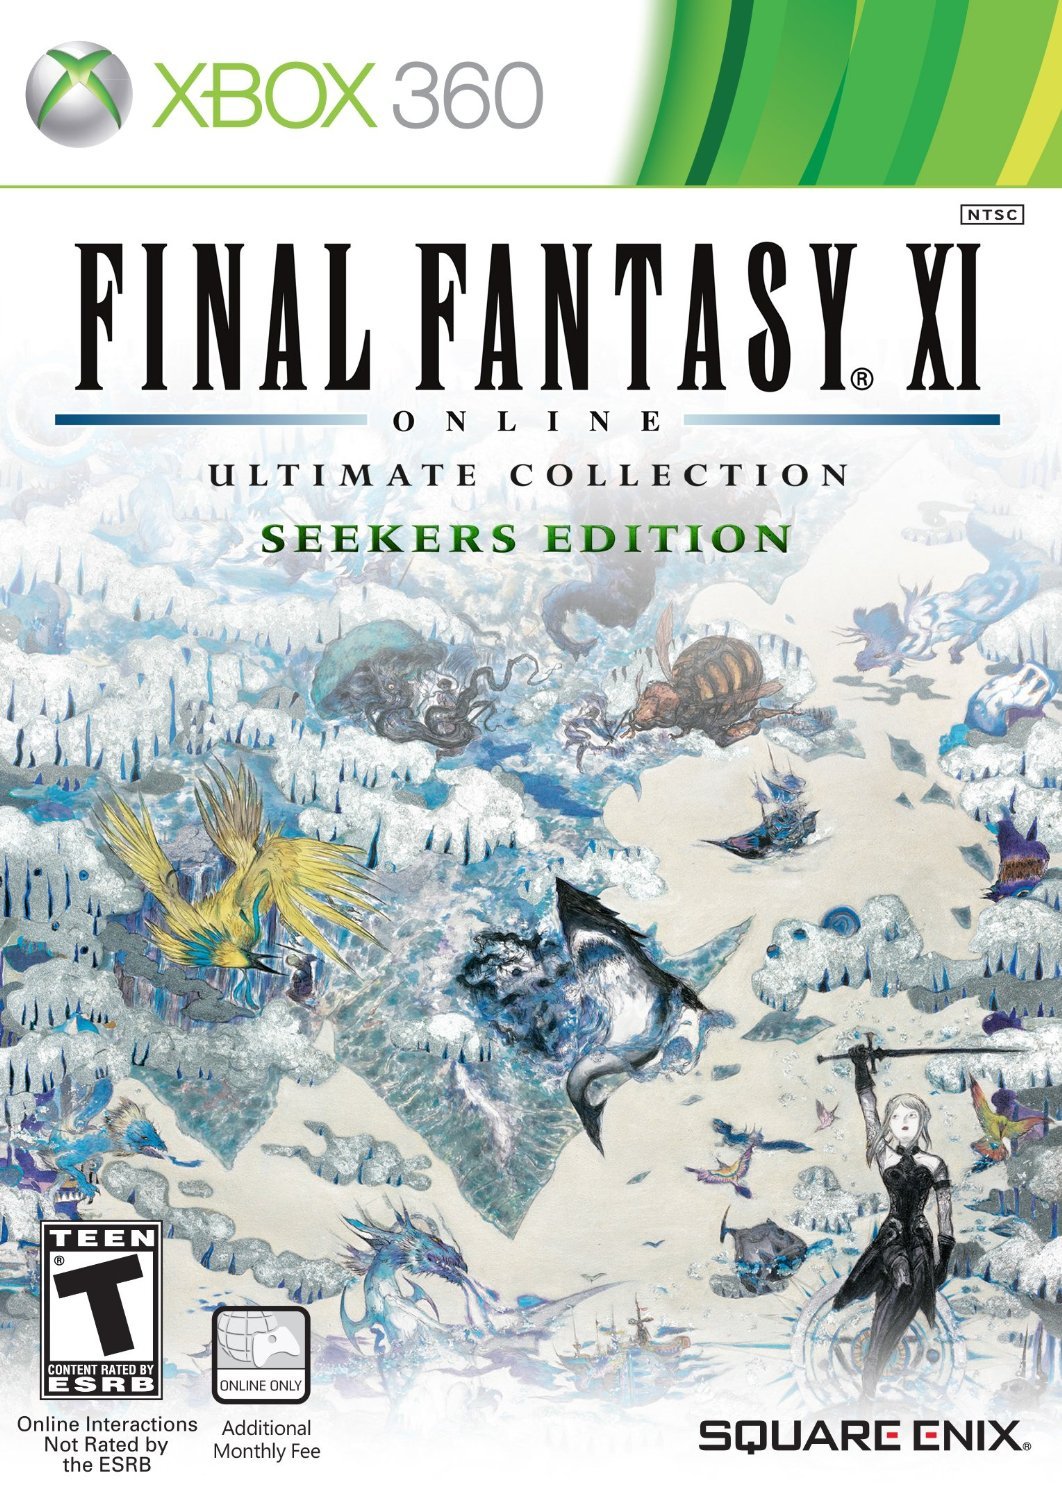 Fial-Fanatsy-XI-Online-Ultimate-Collection-Seekers-Edition-cover-360-USA.jpg